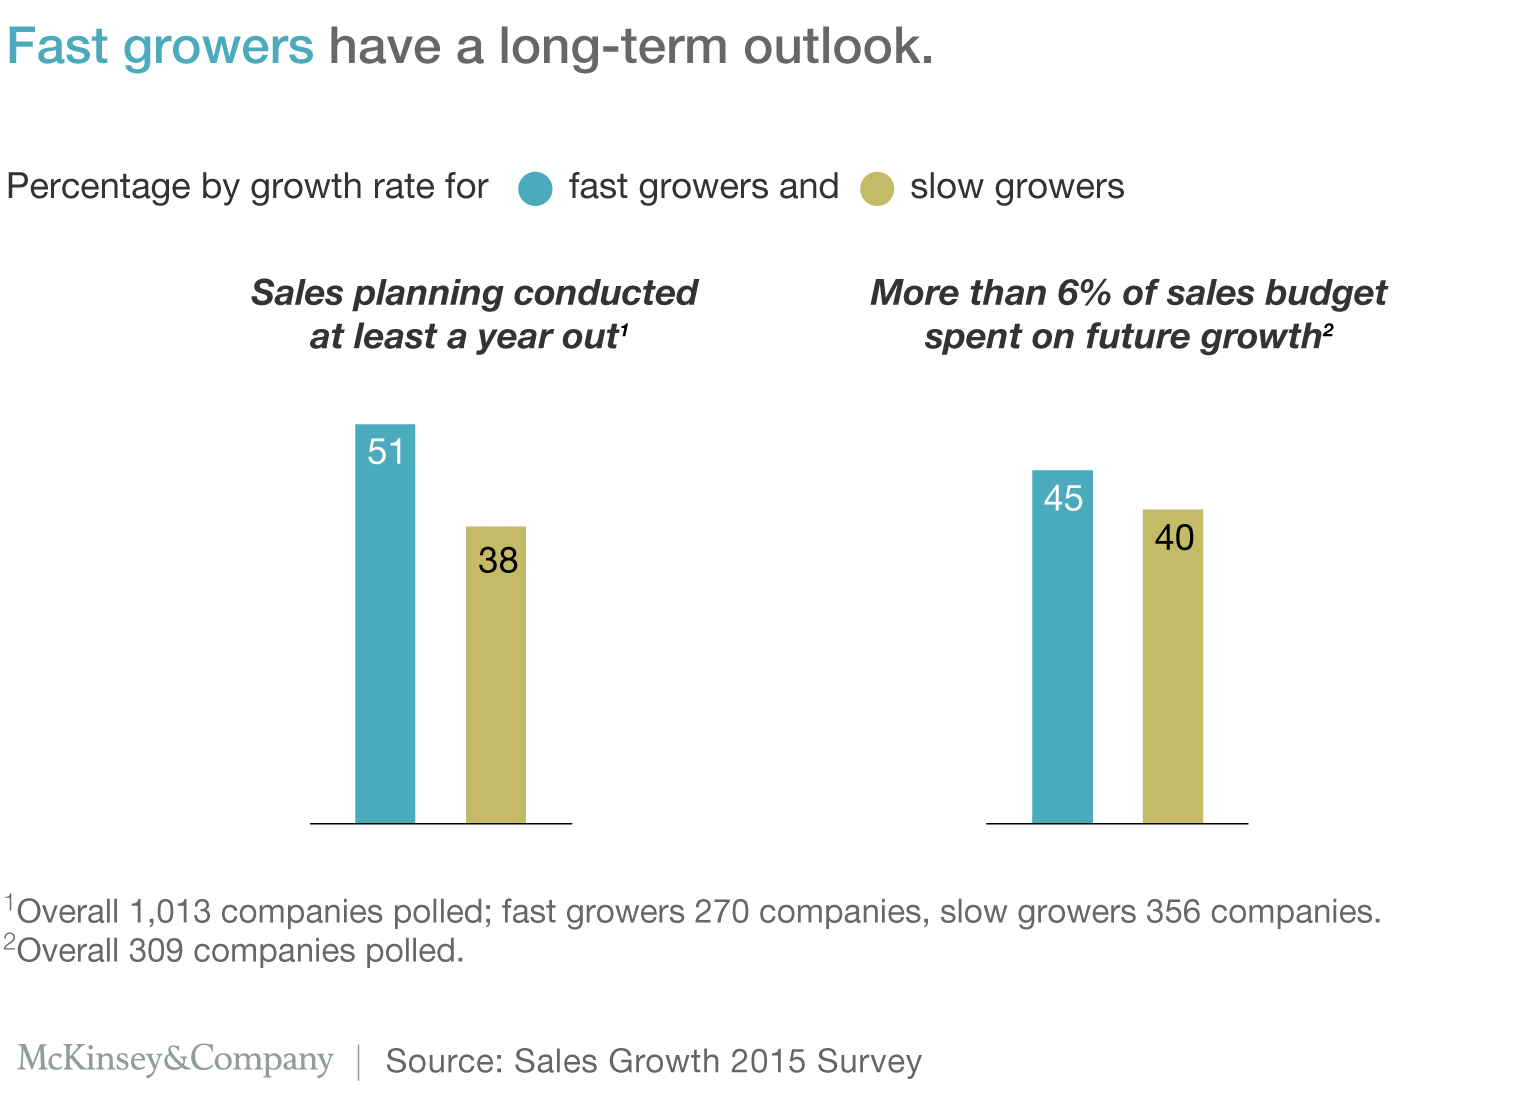 Exhibit 1: Fast growers have a long-term outlook